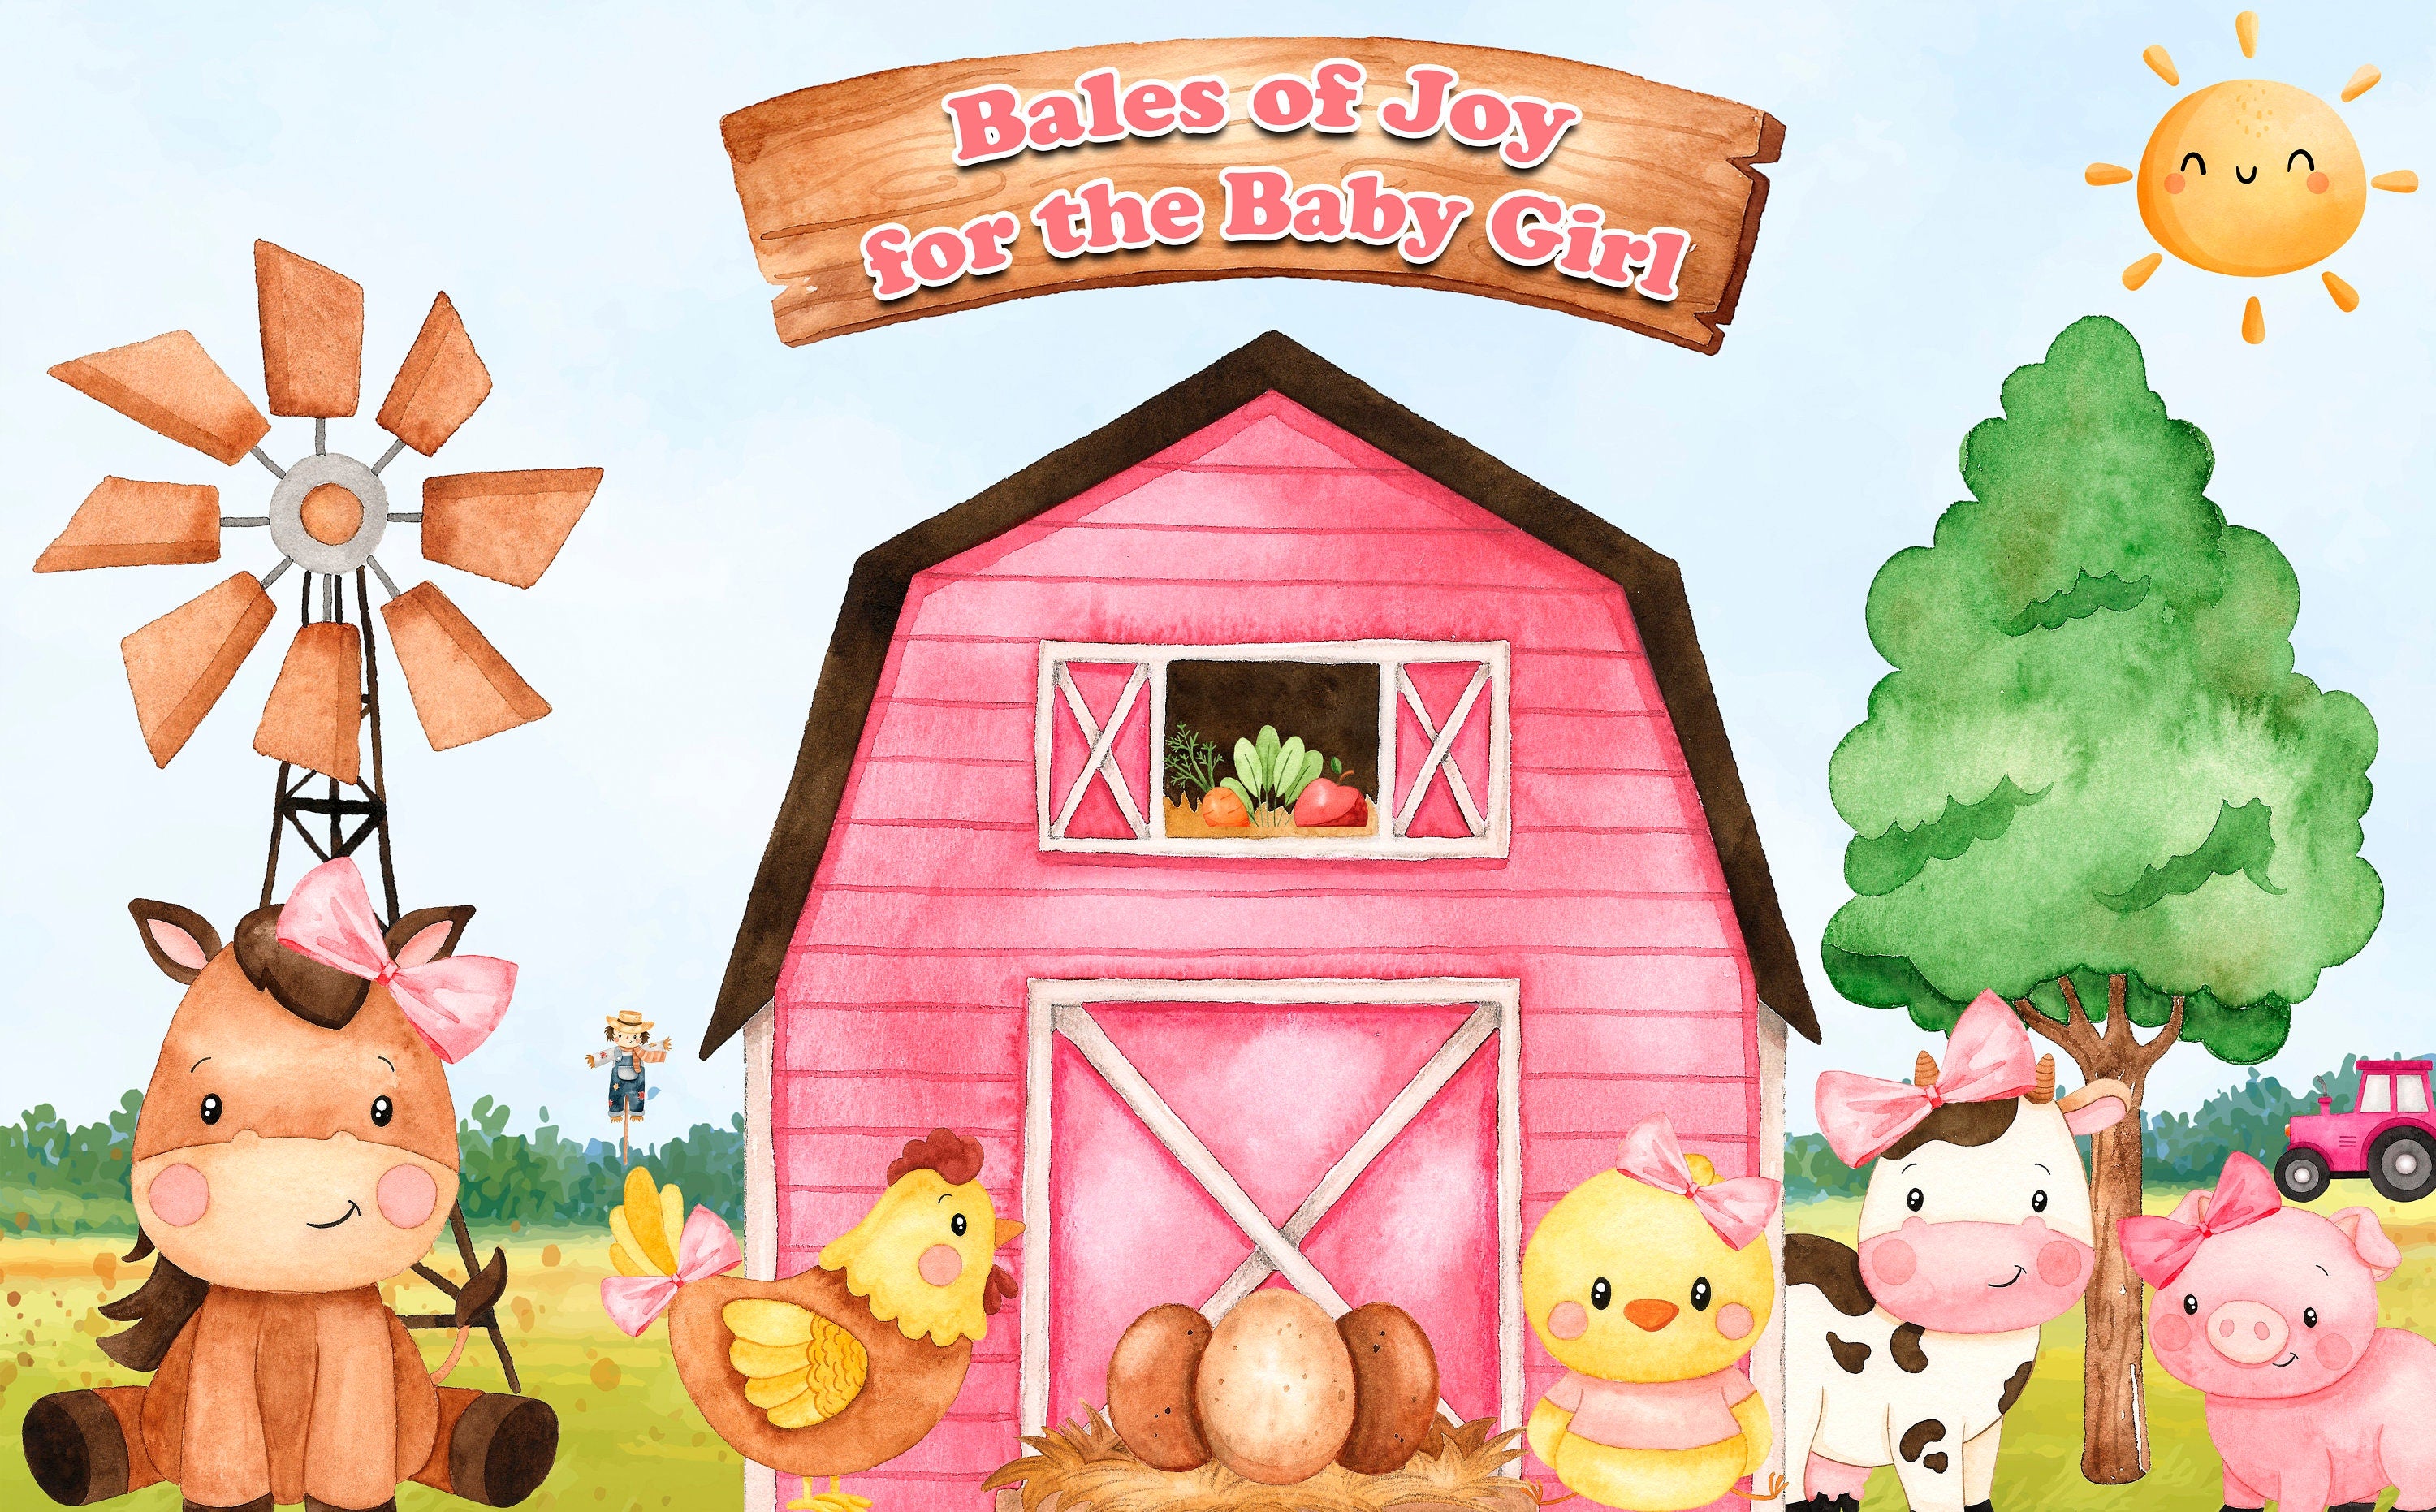 "Bales of Joy for the Baby Girl" - Farm Animals Baby Shower Backdrop 5x3 FT